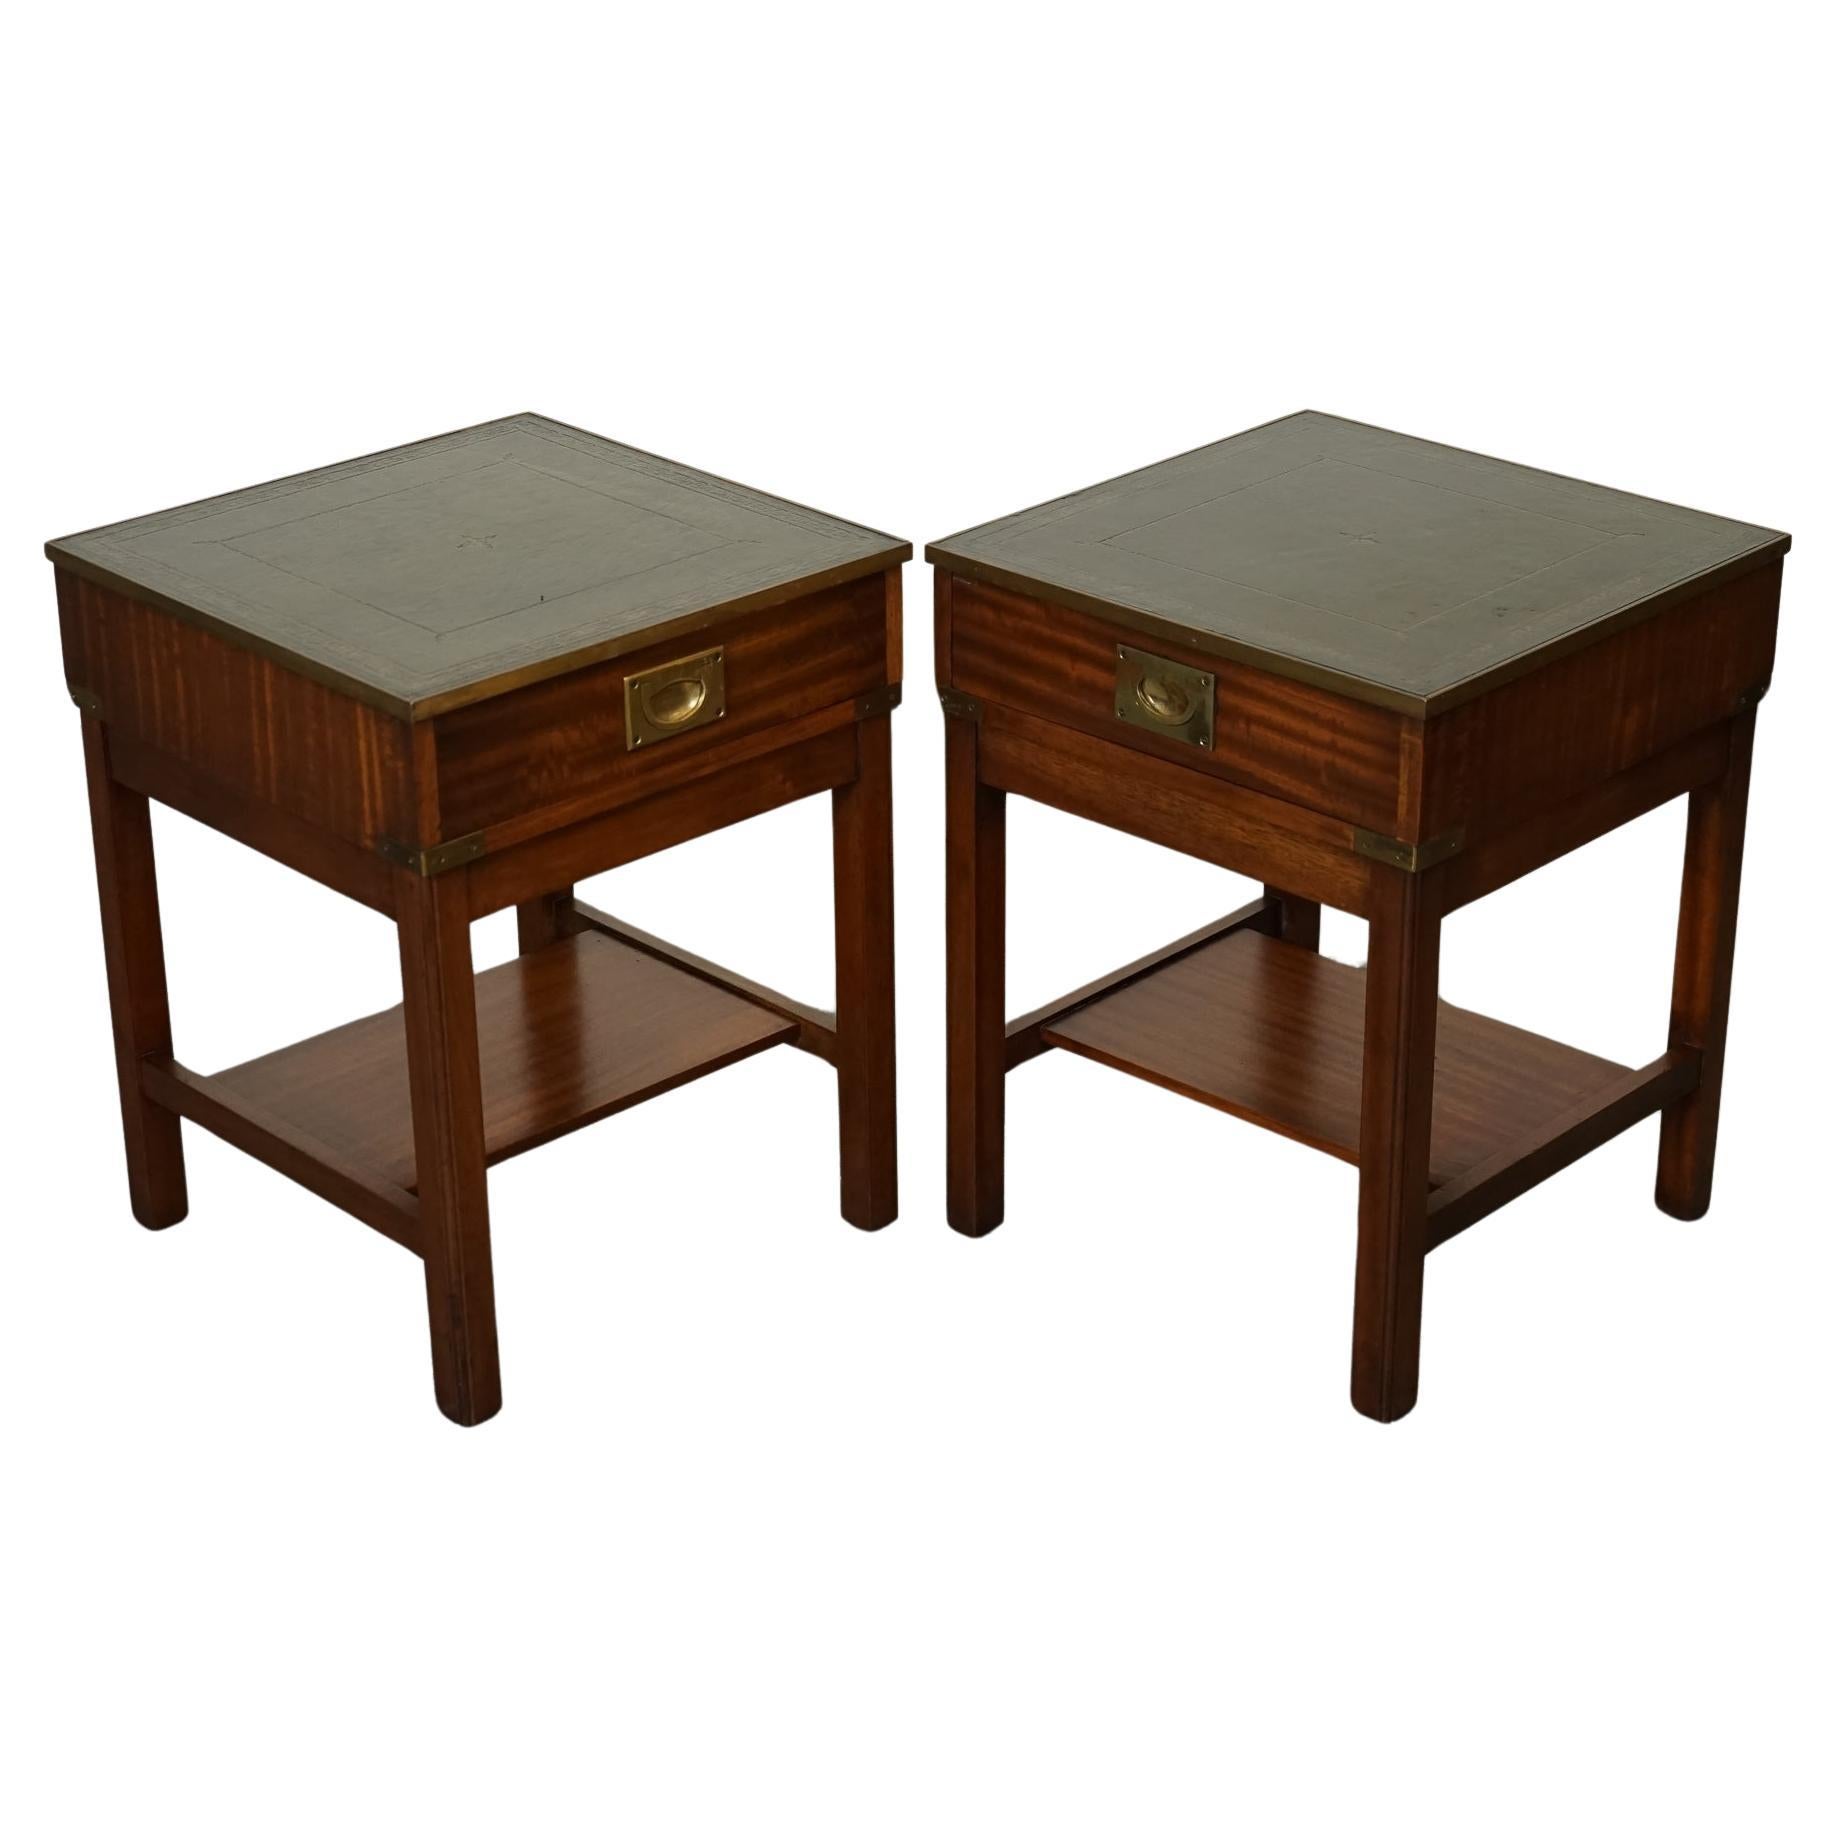 PAIR MILITARY CAMPAIGN BEDSIDE TABLES NIGHTSTANDS ANTiQUE GREEN LEATHER TOP J1 For Sale